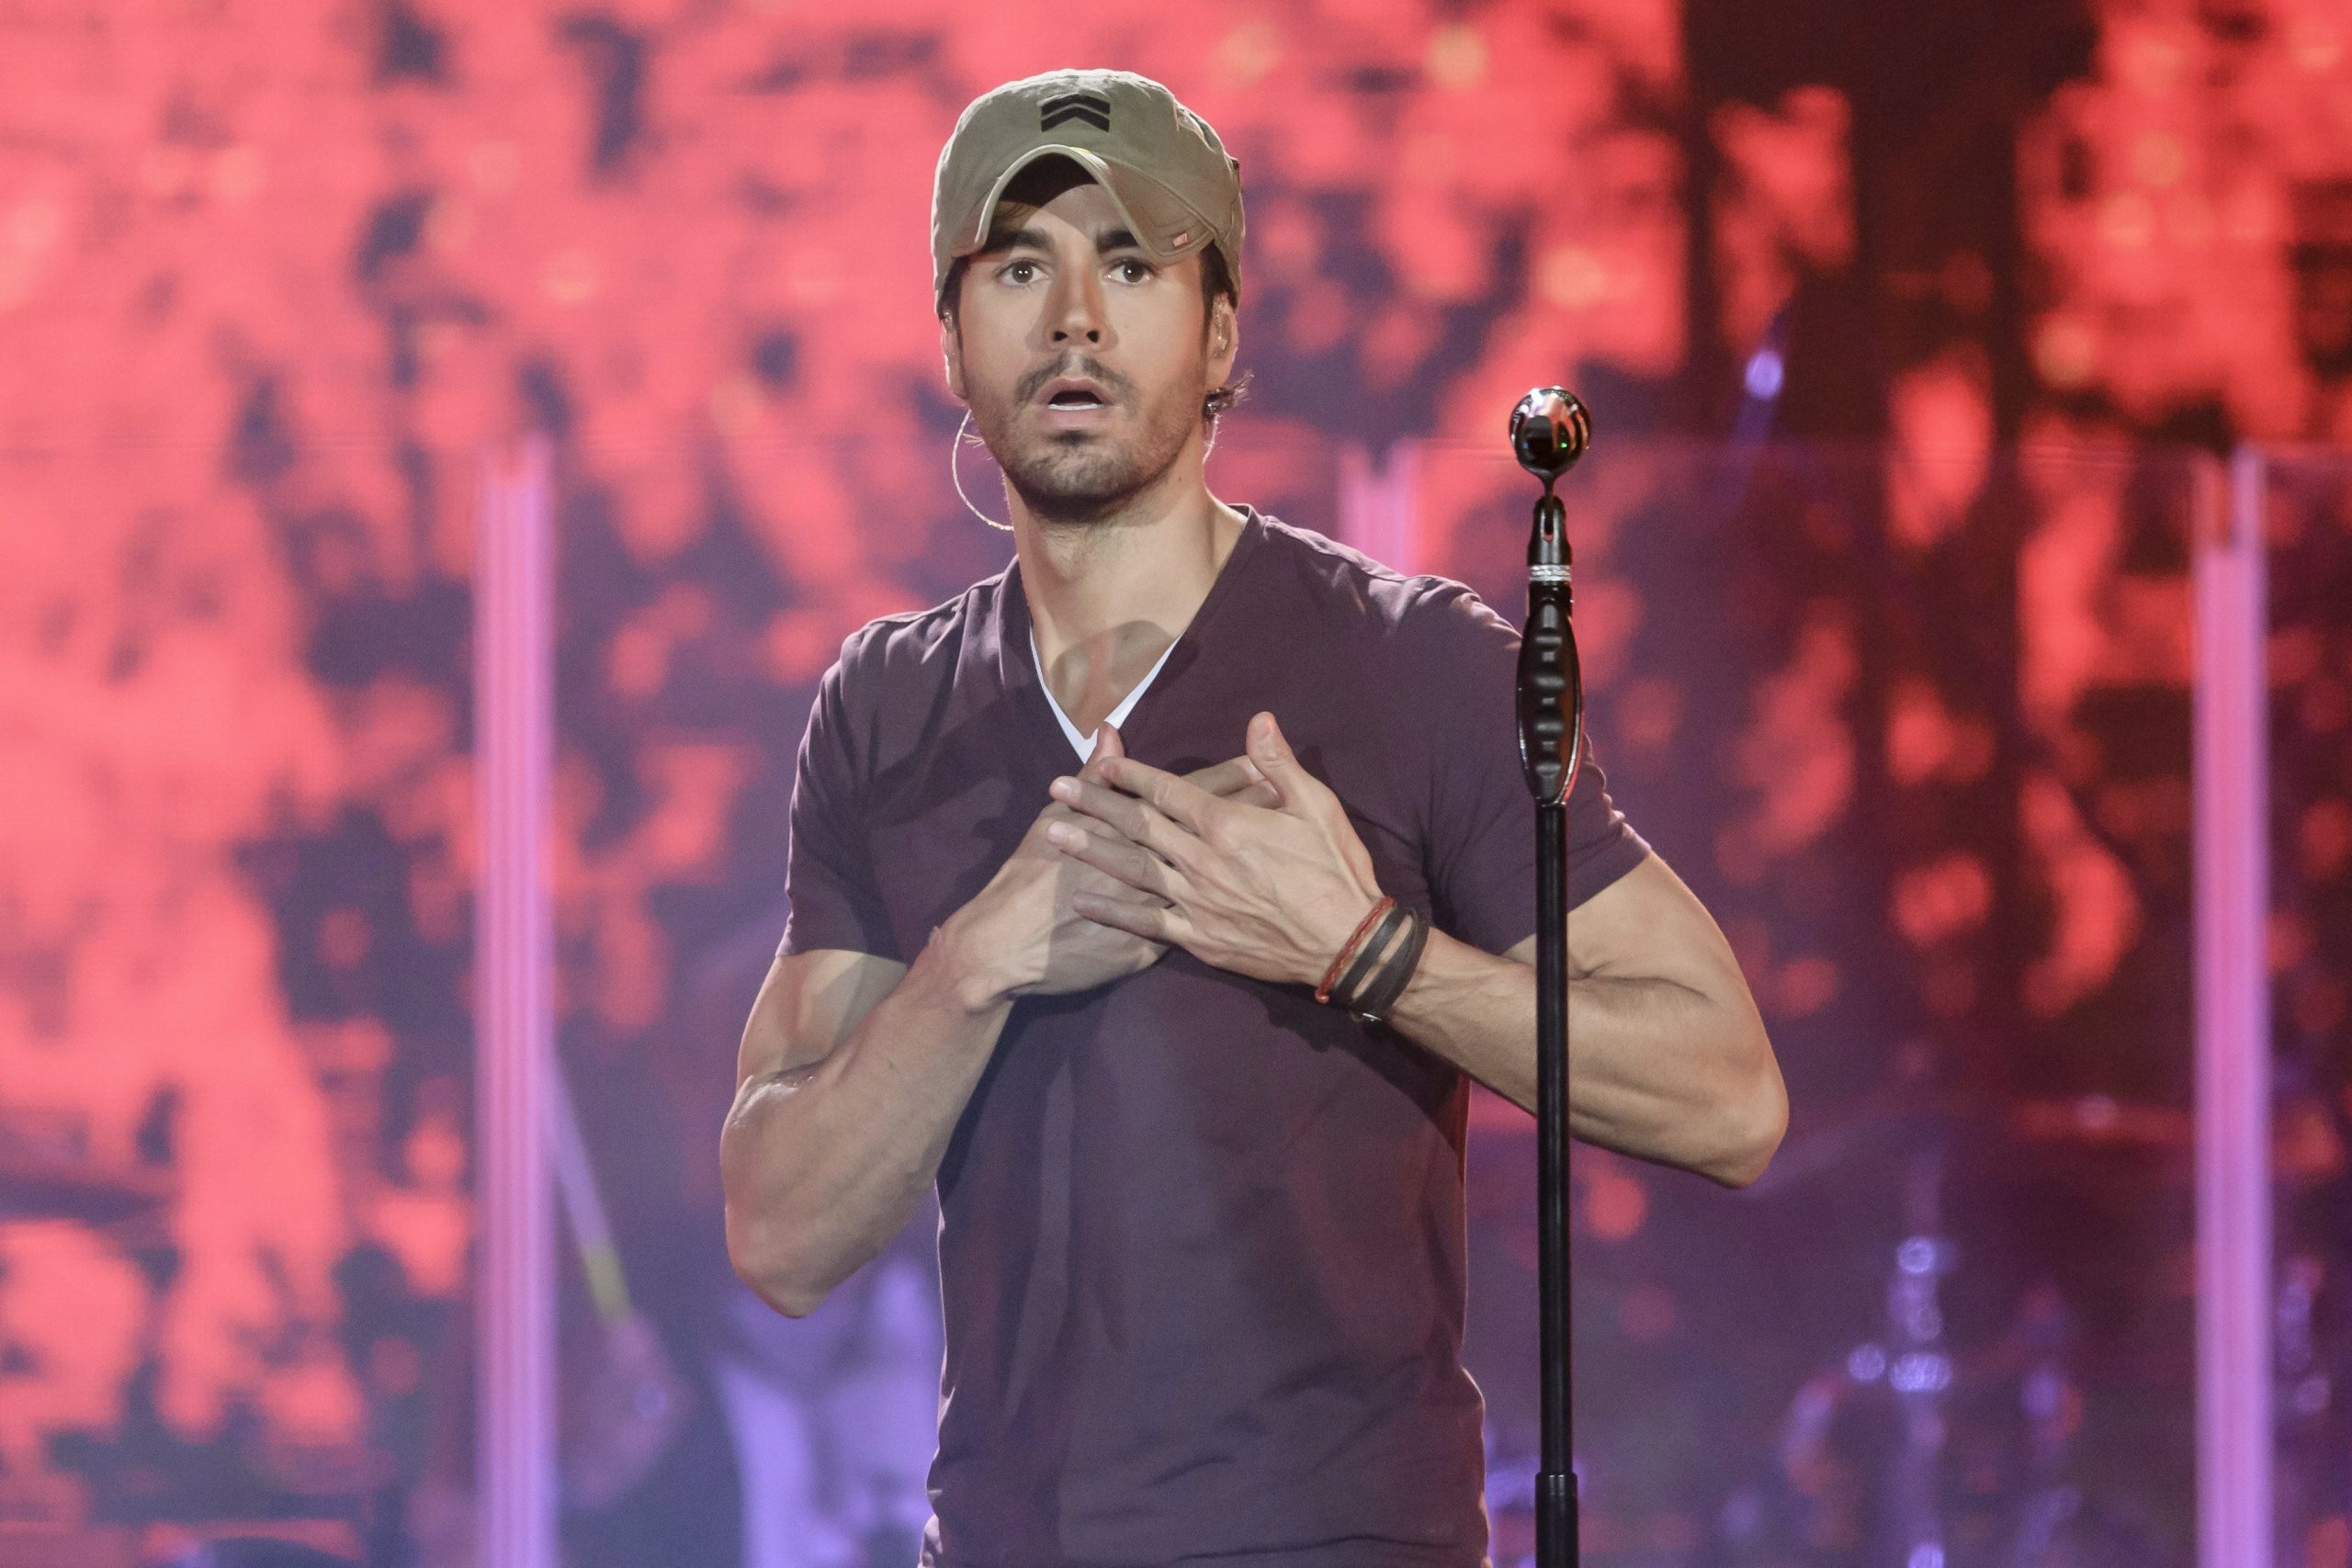 Enrique Iglesias to Give Concert at MVM Dome in Budapest